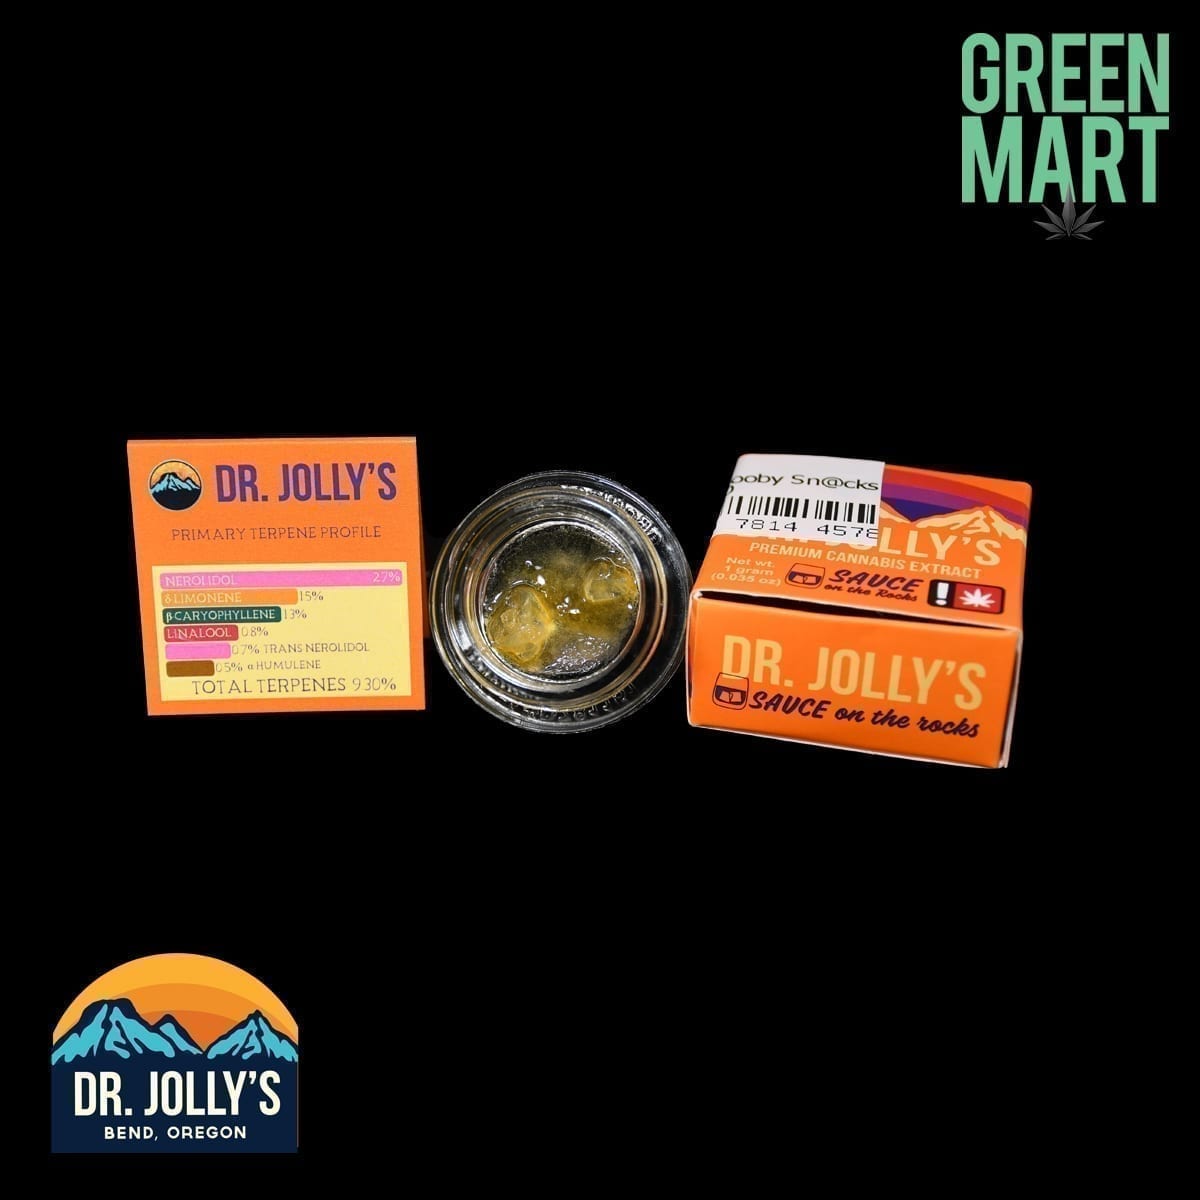 Dr. Jolly's Extracts - ScoobySnacksxMysteryMachineSauceonTerps